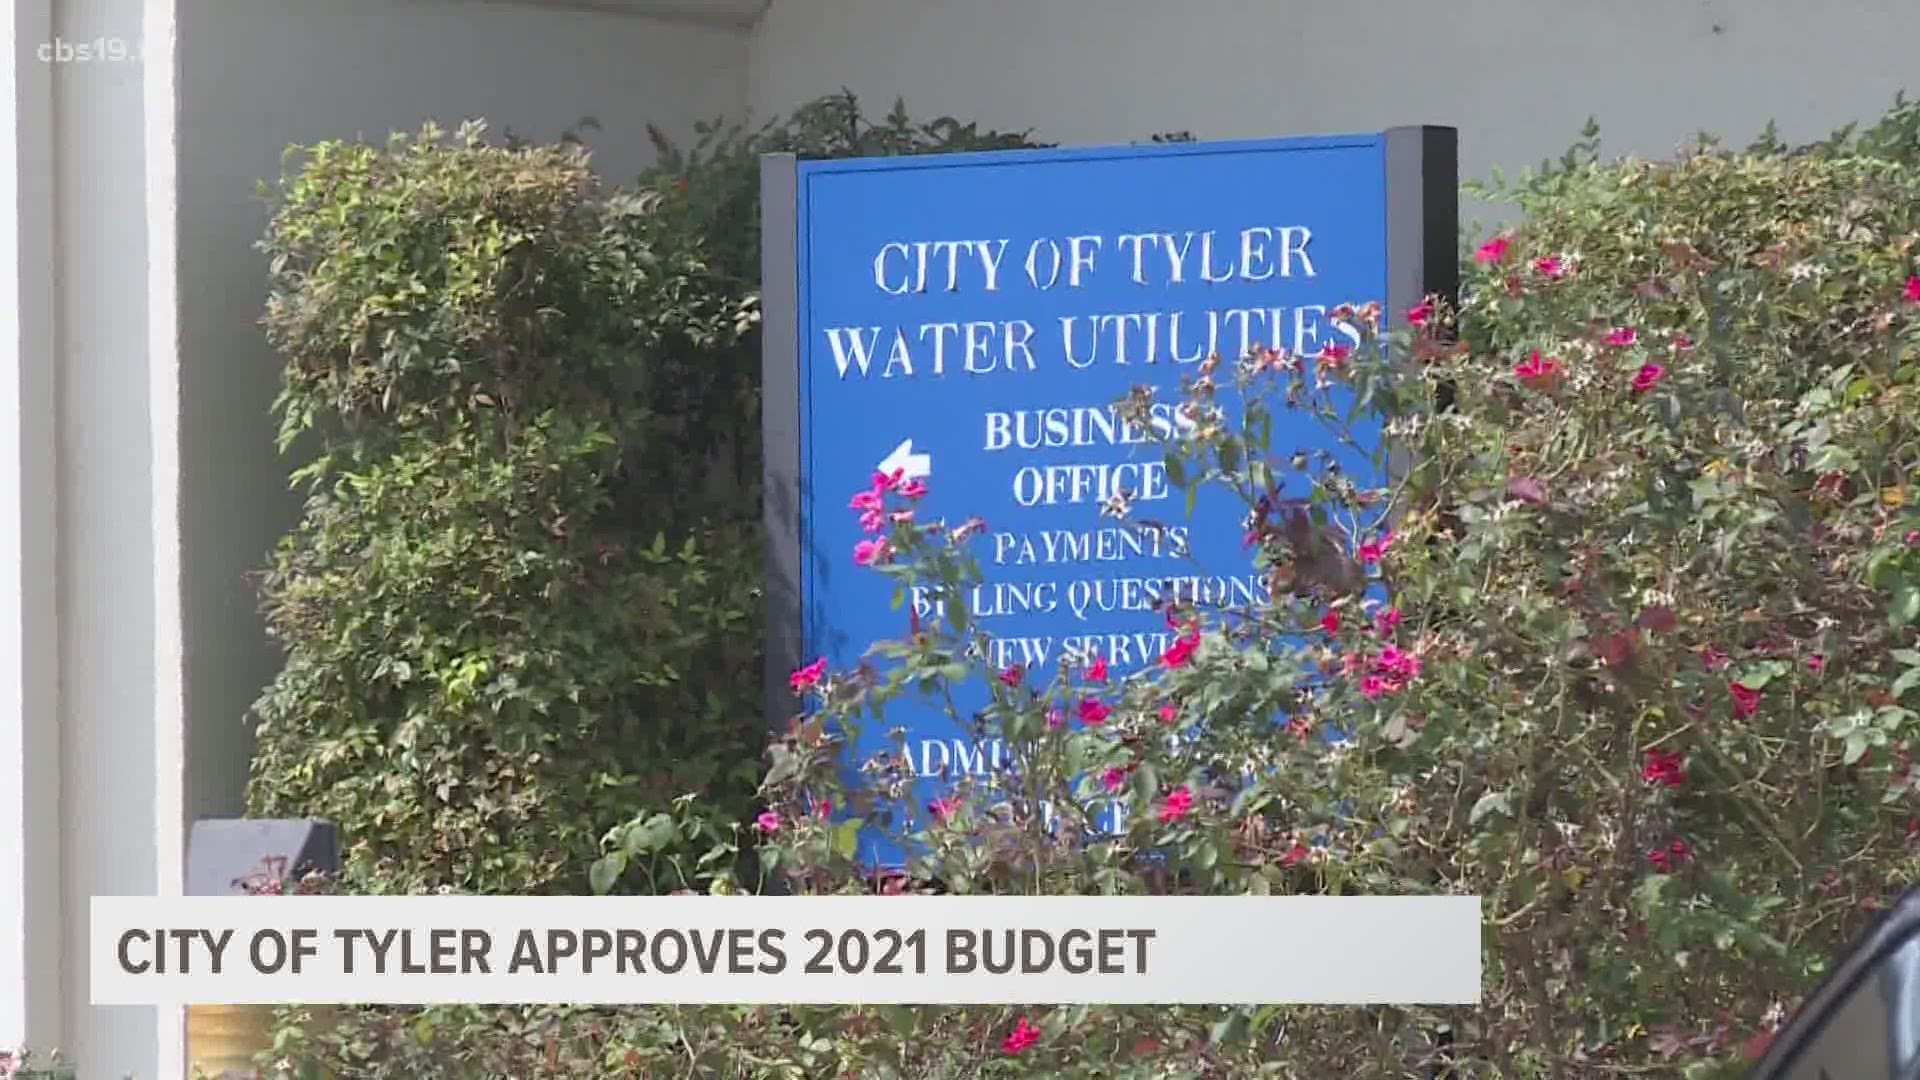 The budget includes traffic signal updates and storm water repairs. There will also be a new property tax rate.